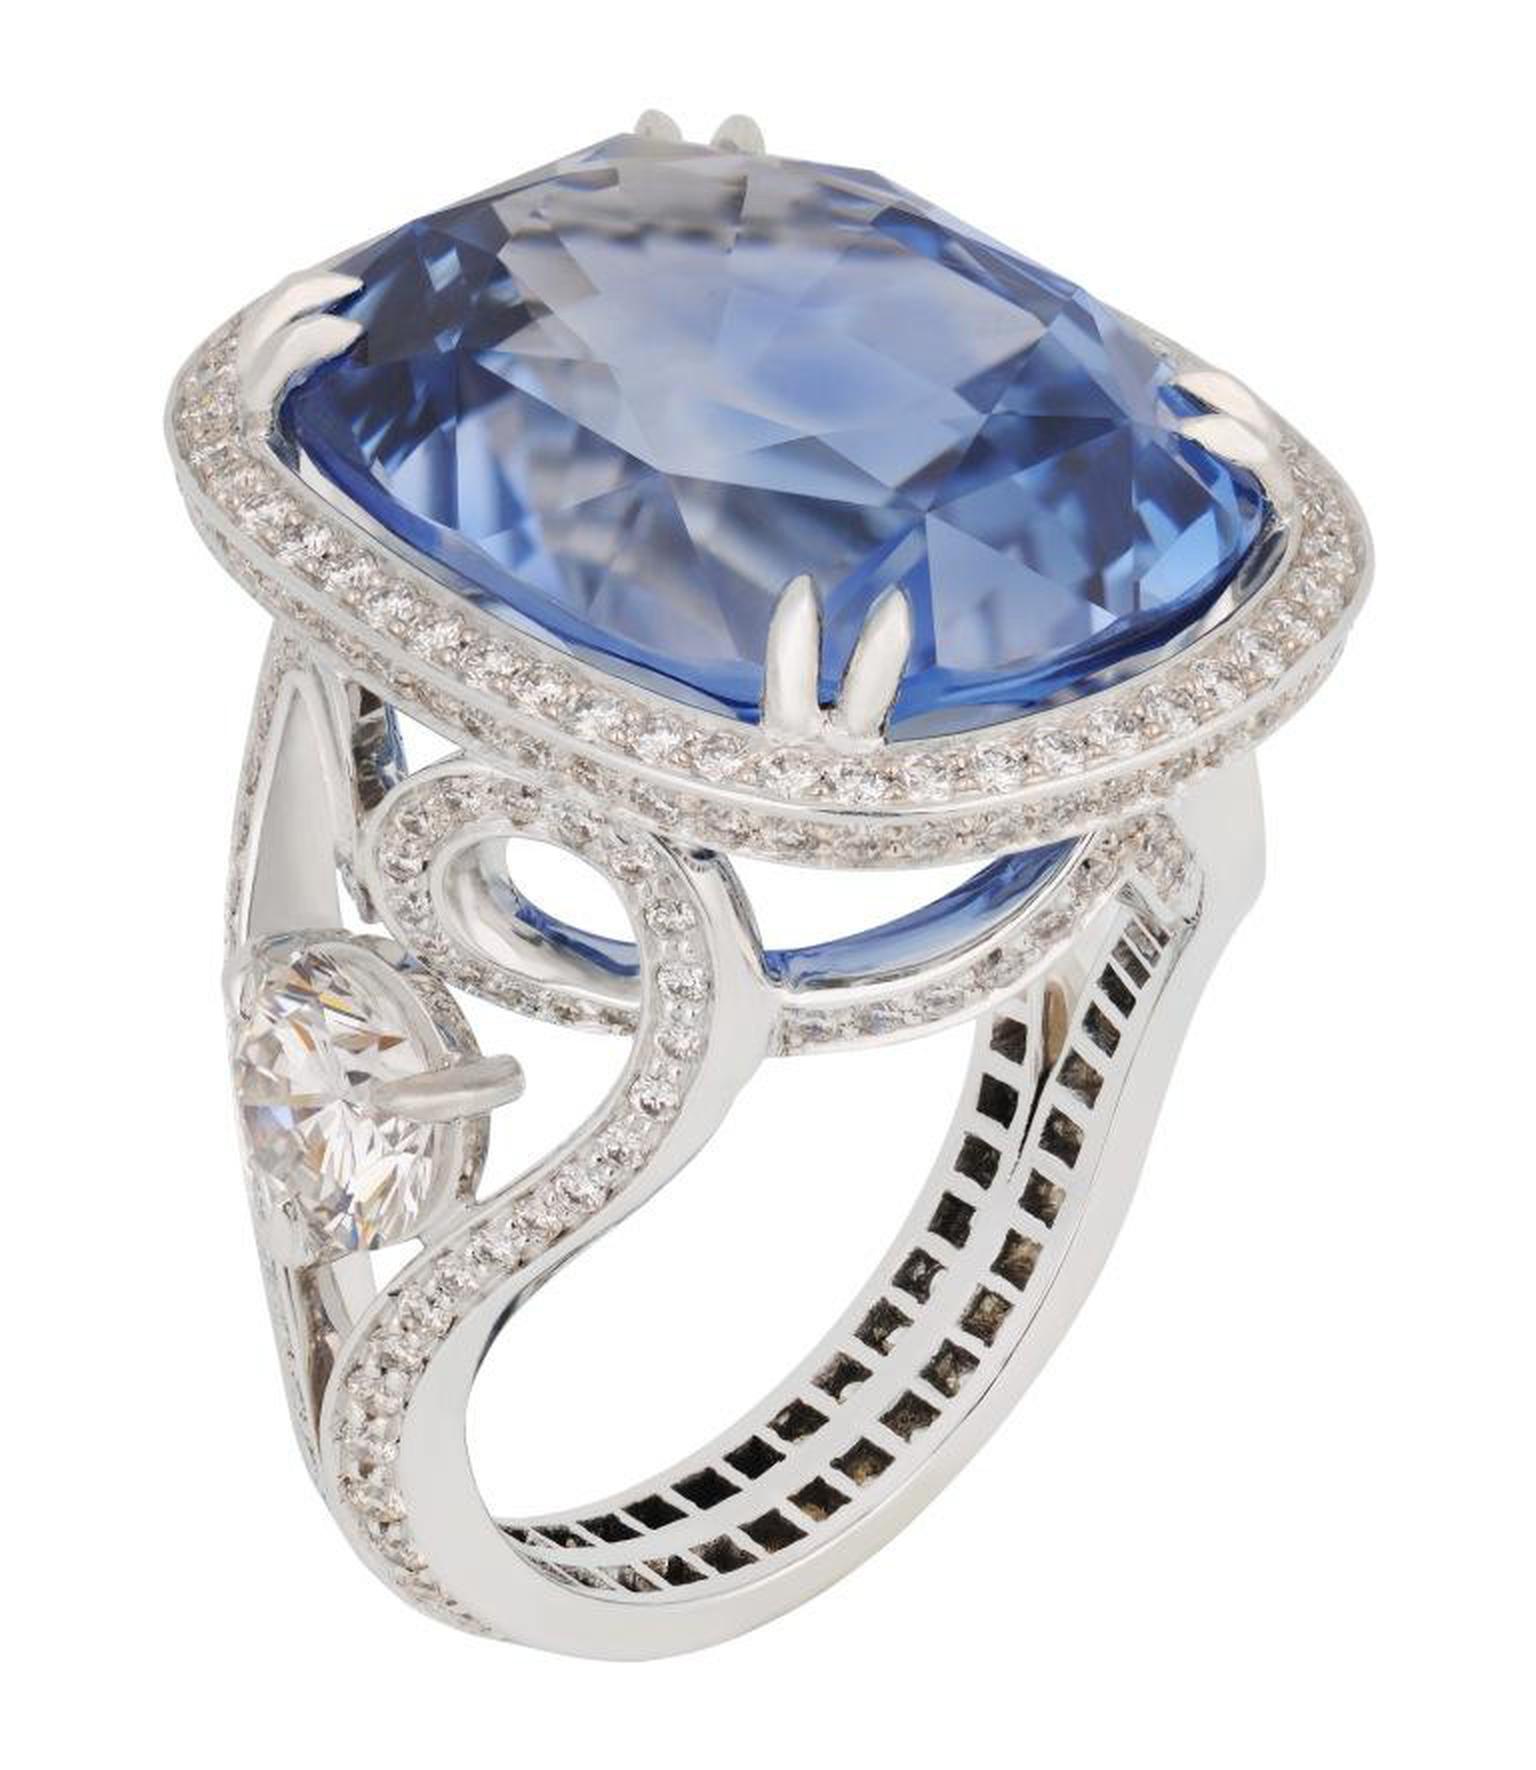 Faberge-Blue-Sapphire-Ring